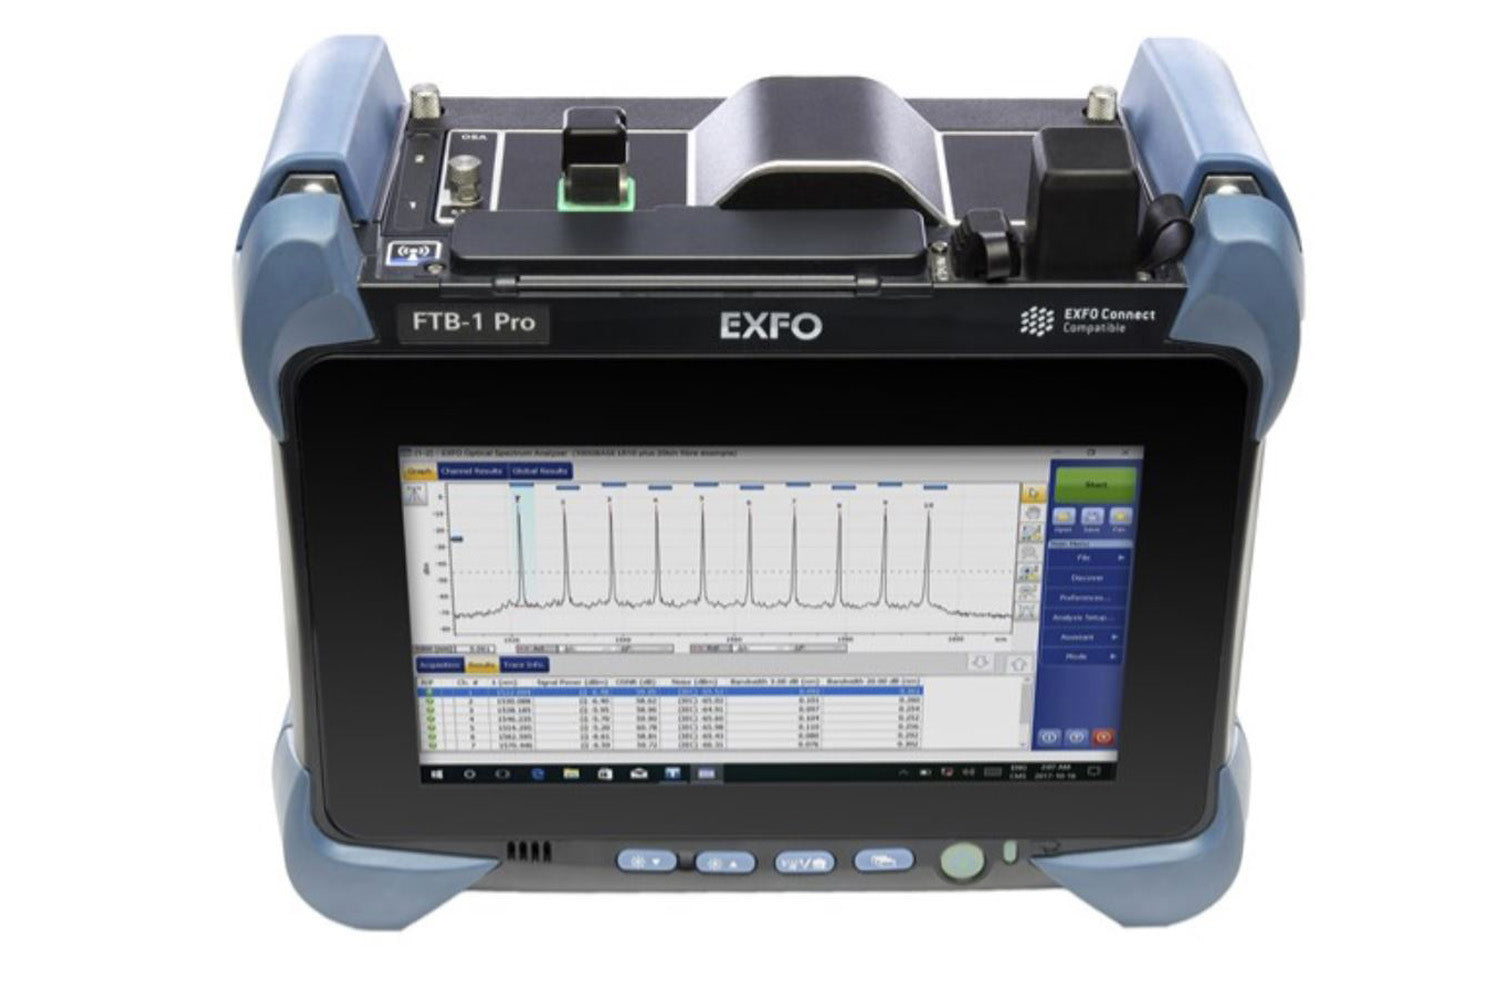 EXFO testing, inspection and mesuring equipment